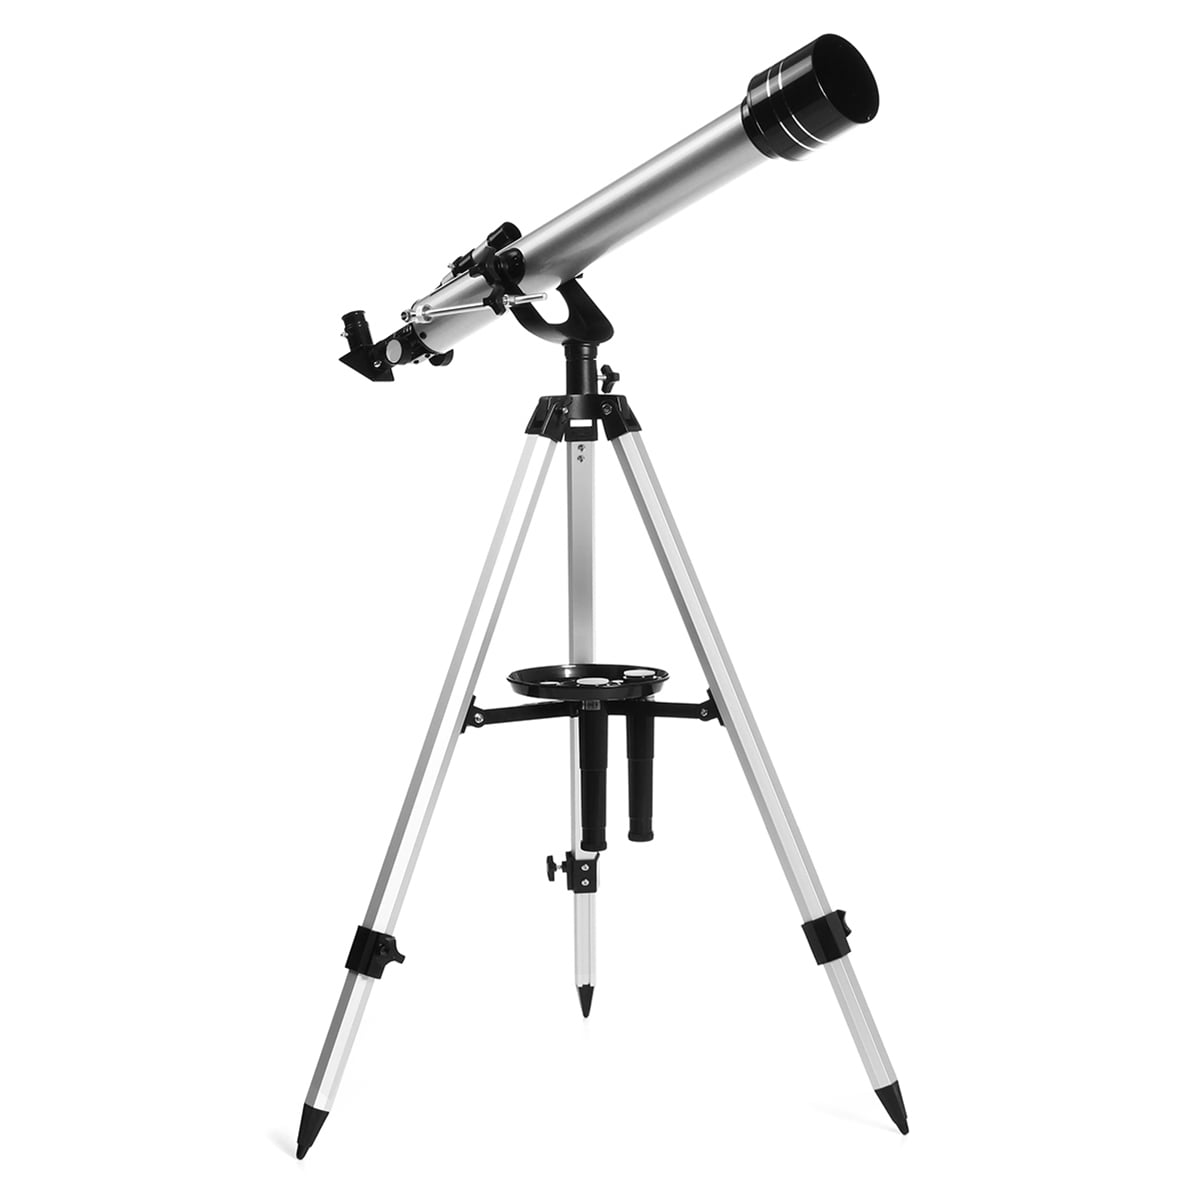 JHLD Telescope for Kids and Beginners 70mm Apeture Travel Scope 400mm AZ Mount Good Partner to View Moon and Planet-TC-4 